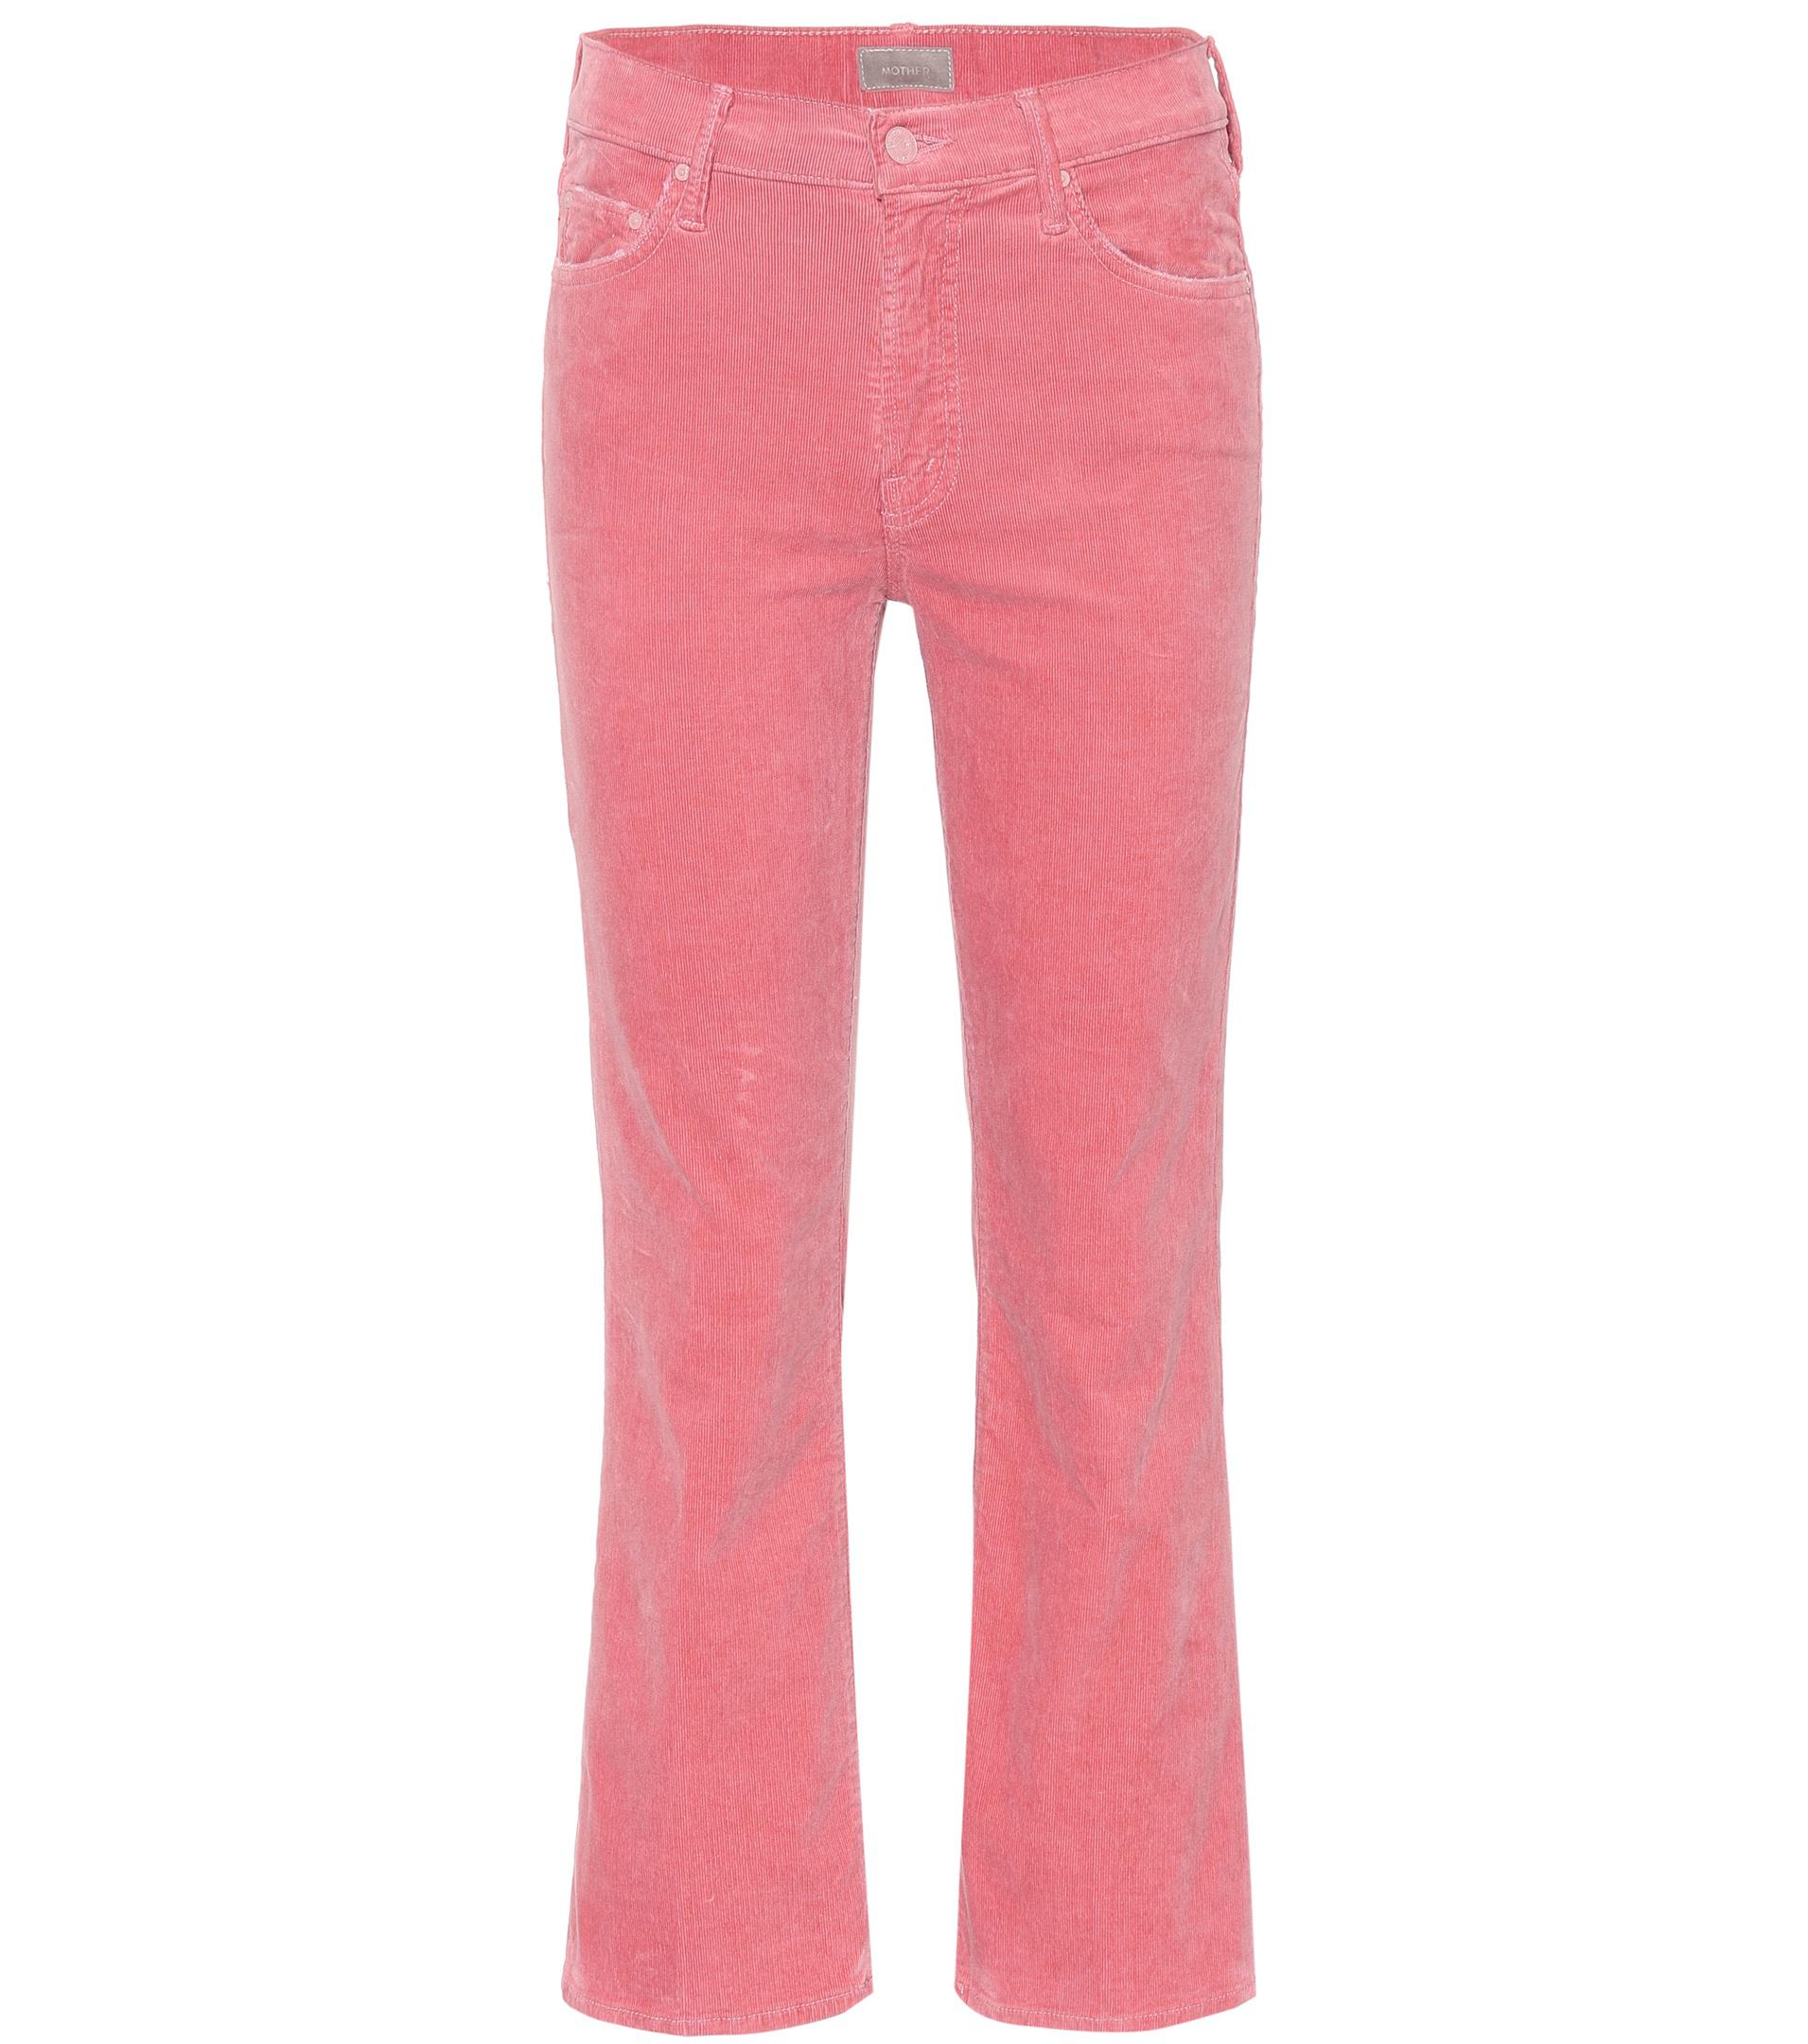 Mother Denim The Outsider Cropped Corduroy Jeans in Pink - Lyst